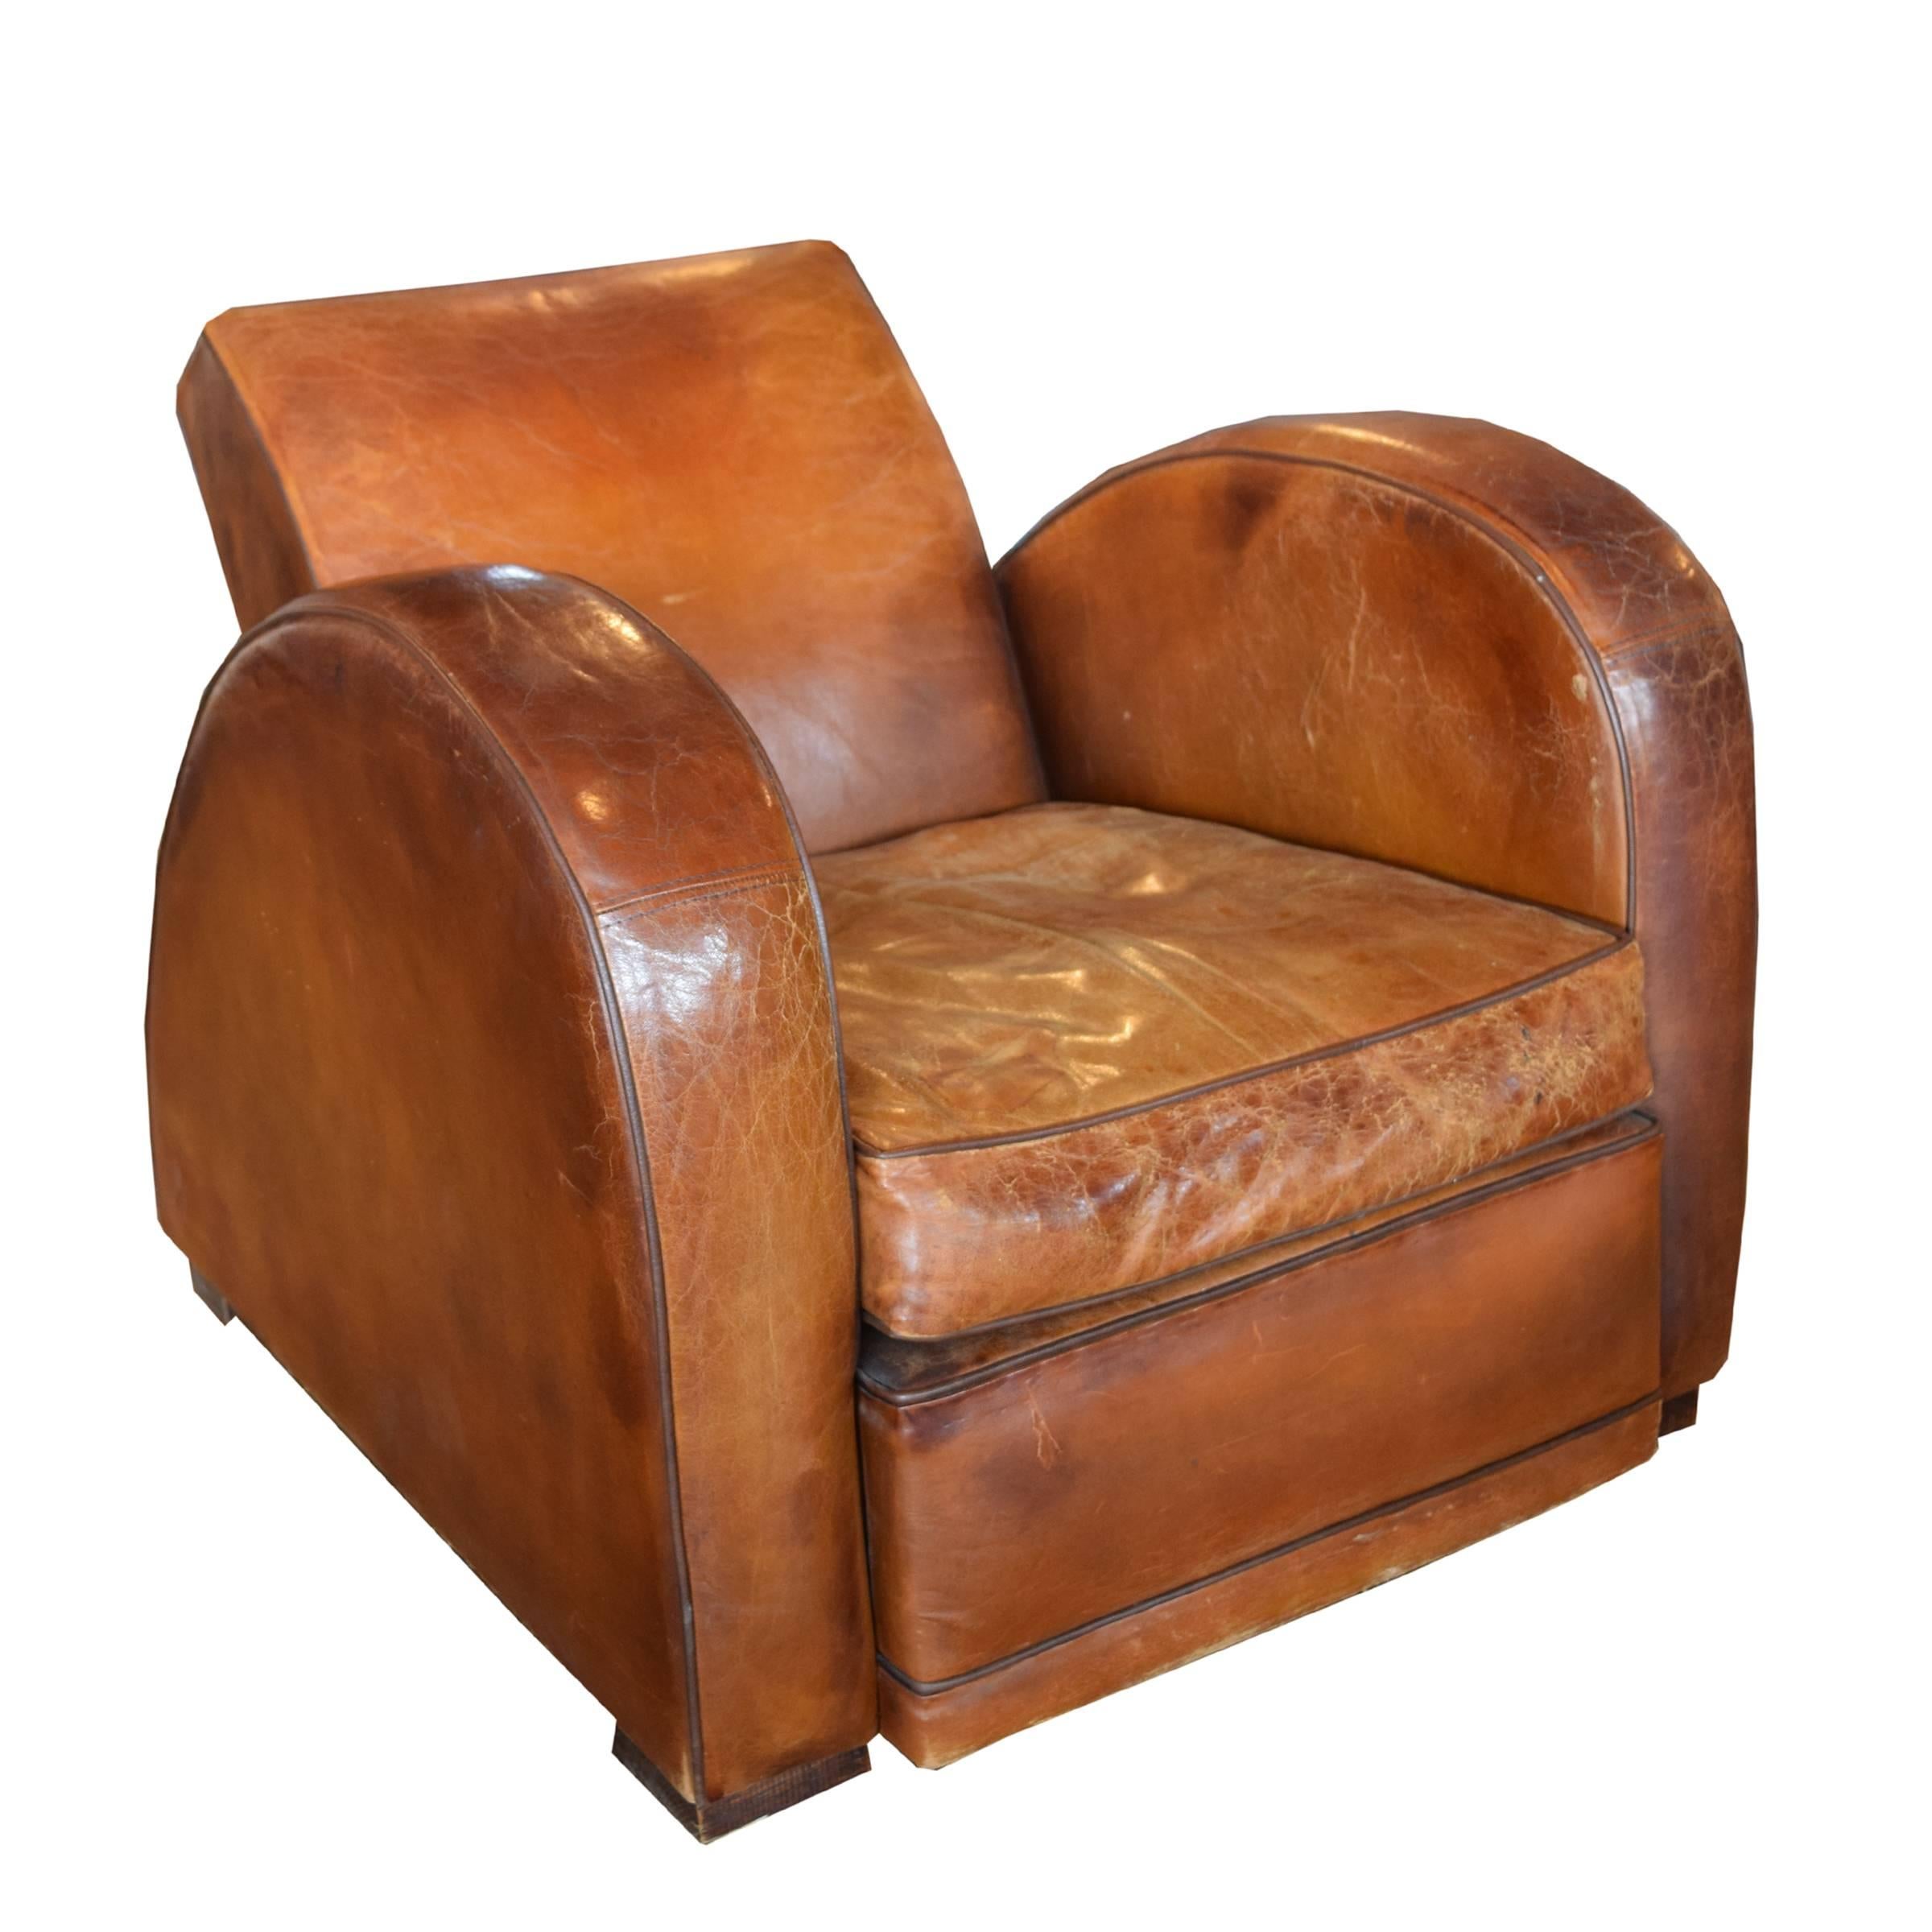 A French leather racecar club chair with a great patina, reclined back and dramatically curved sides, circa 1930.